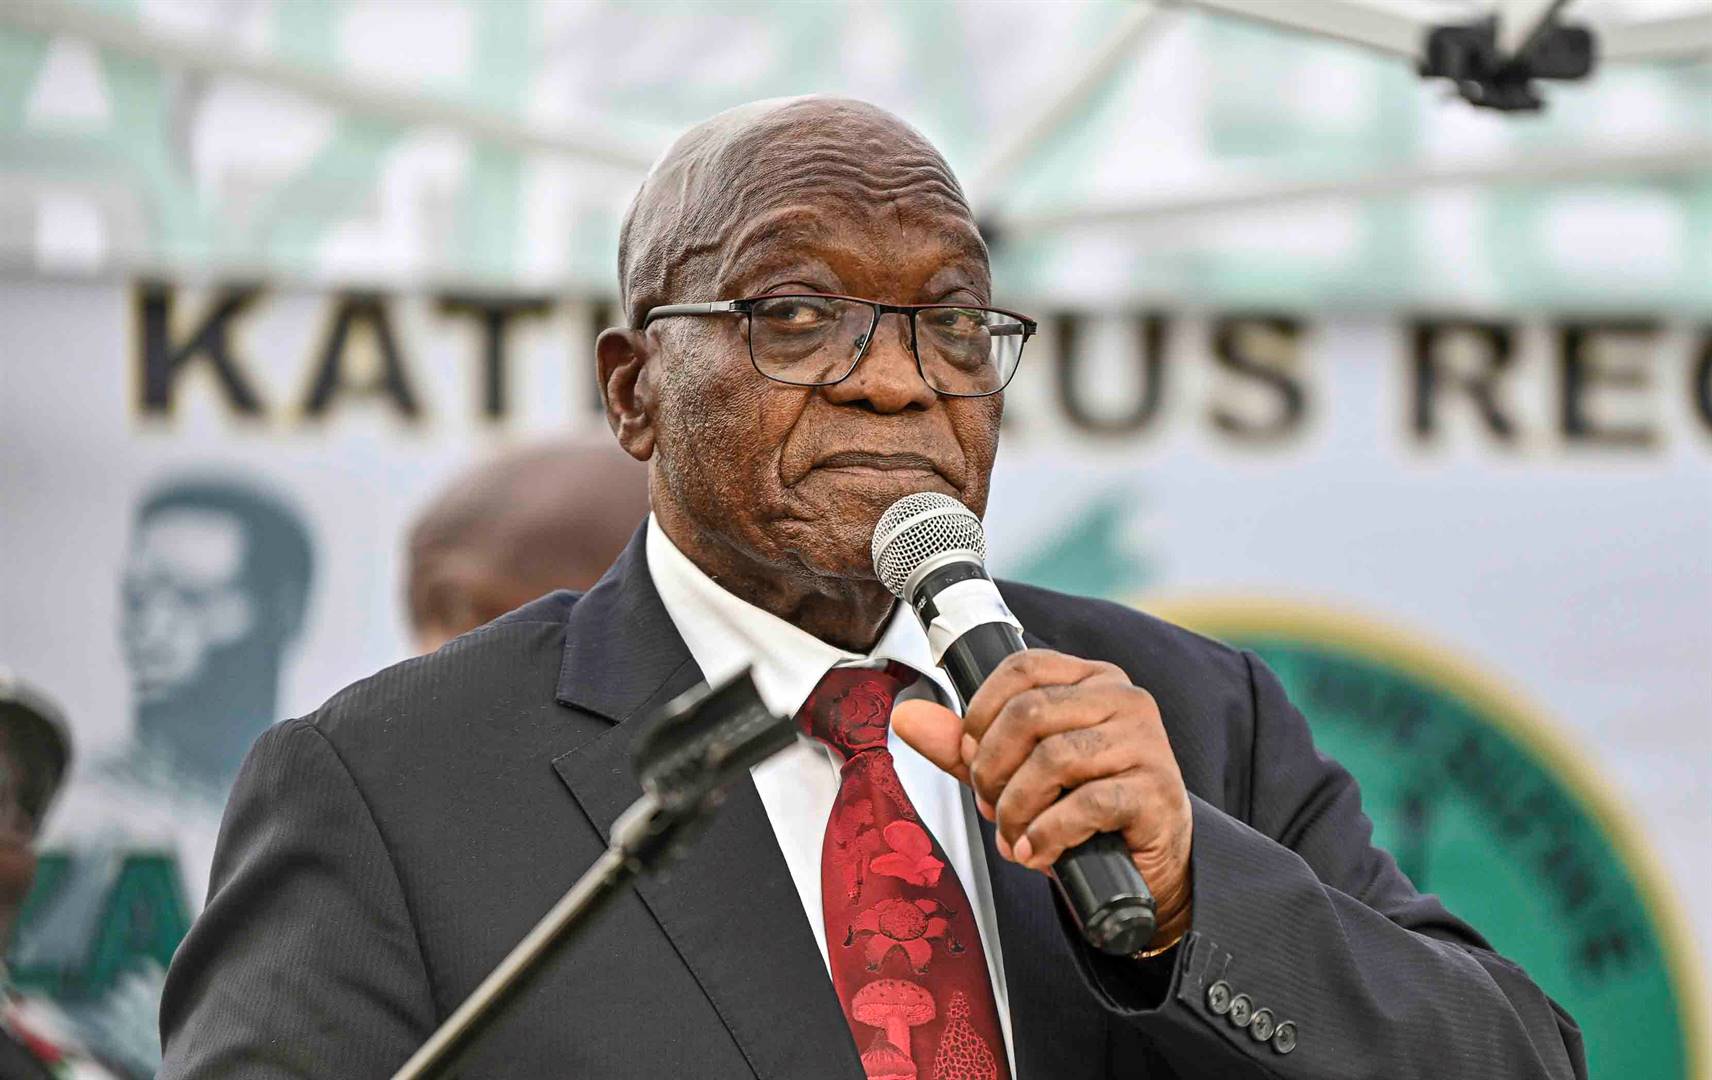 The IEC has lodged an urgent and direct appeal to the ConCourt relating to the order of the Electoral Court setting aside its decision to remove former president Jacob Zuma from the MKP’s candidate list.